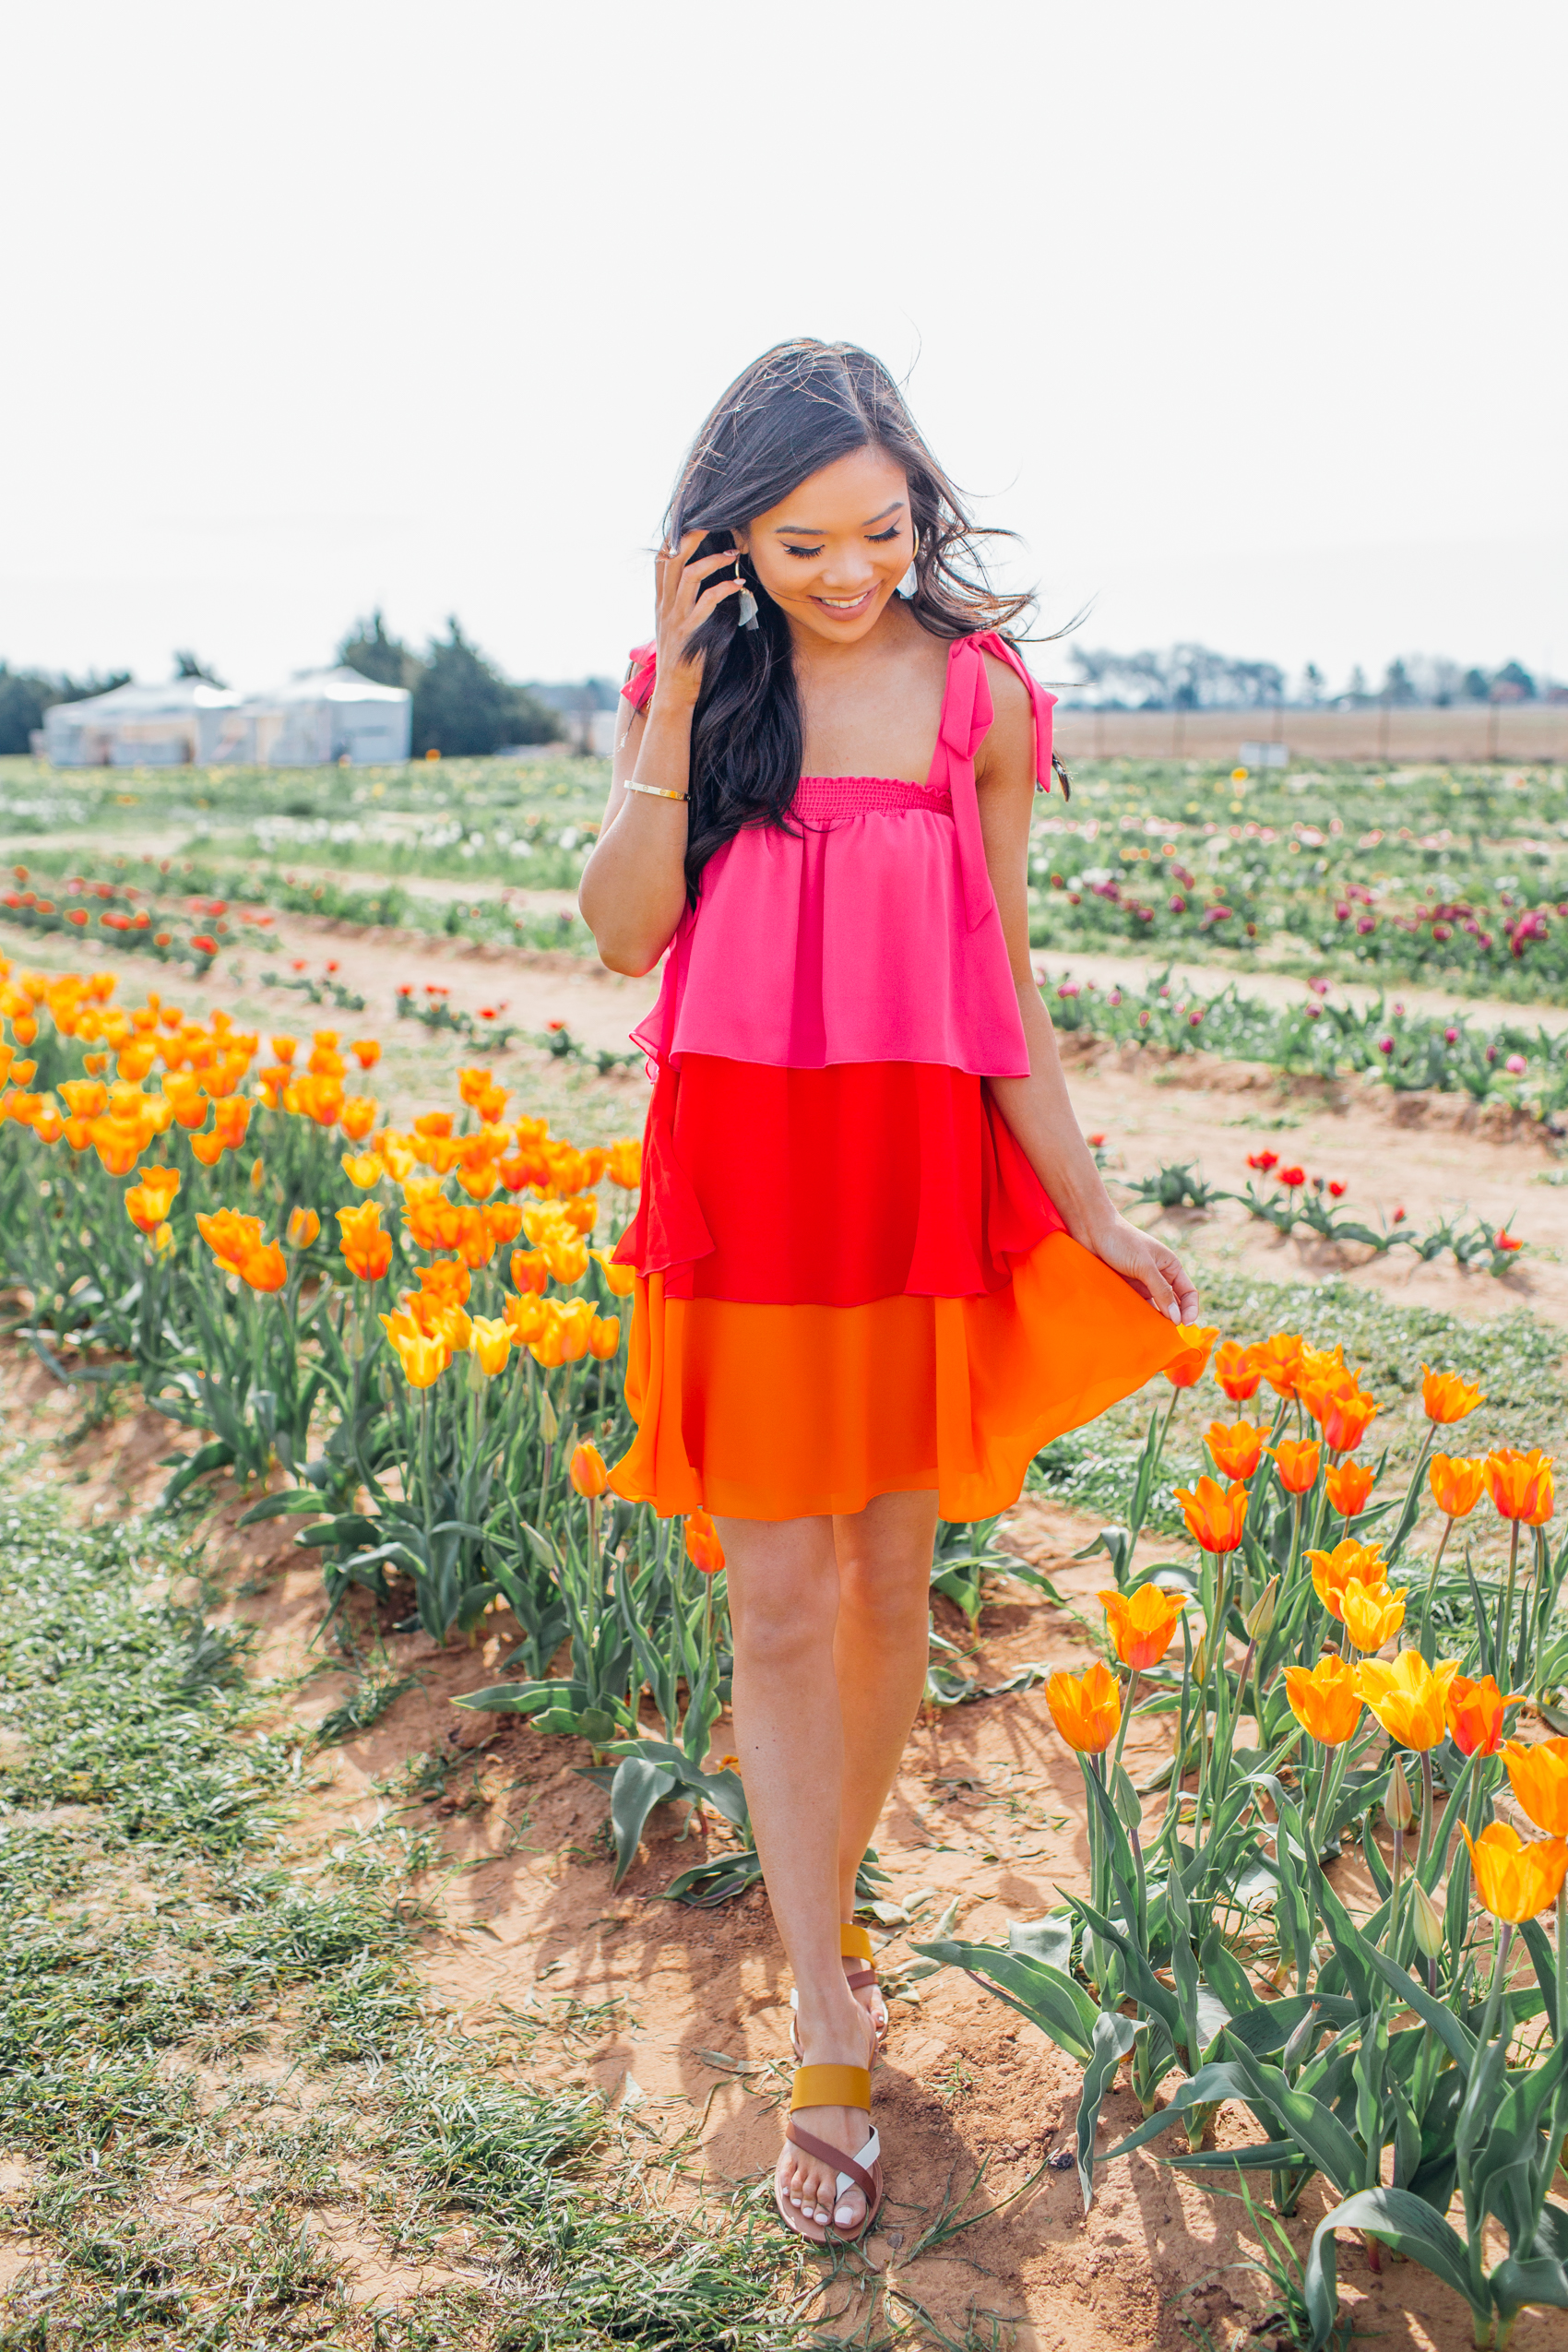 Blogger Hoang-Kim wearing a colorful dress at Texas Tulips in Pilot Point